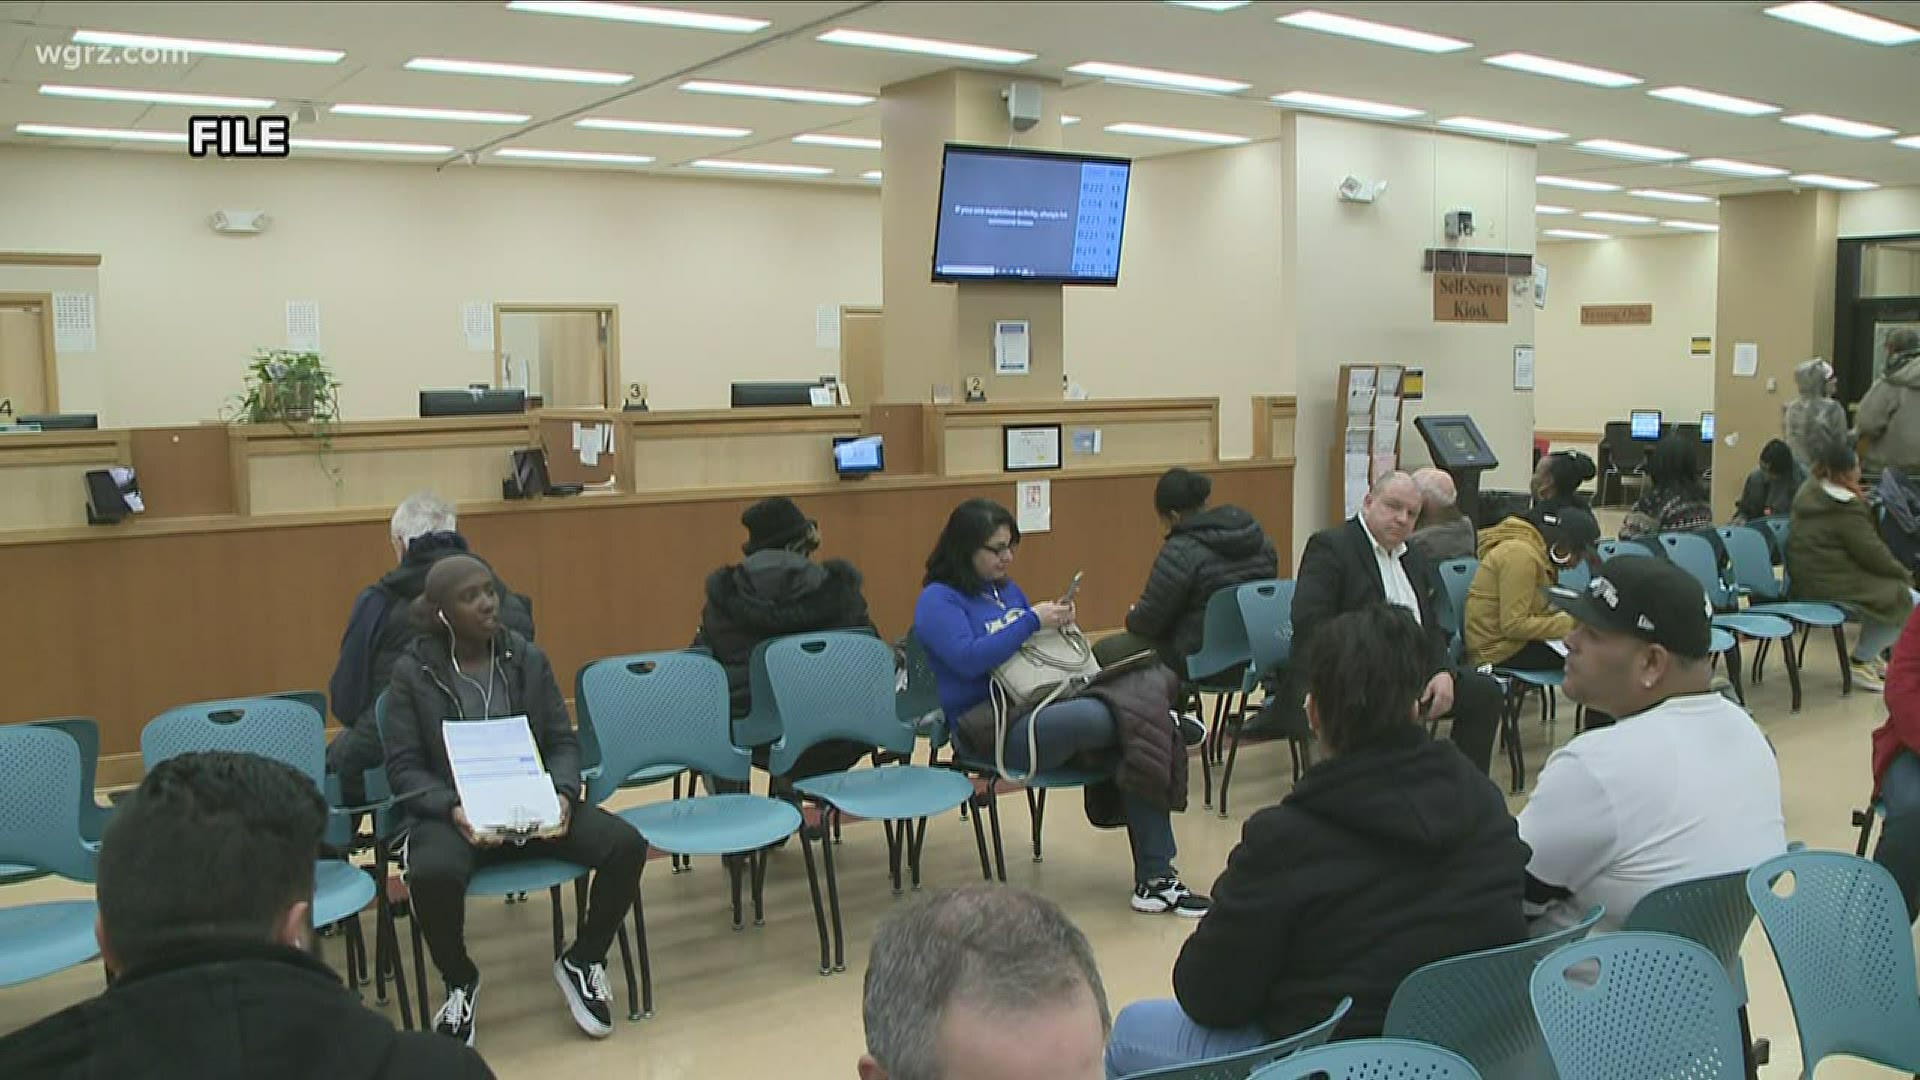 Your questions answered on when the DMV will reopen | wgrz.com